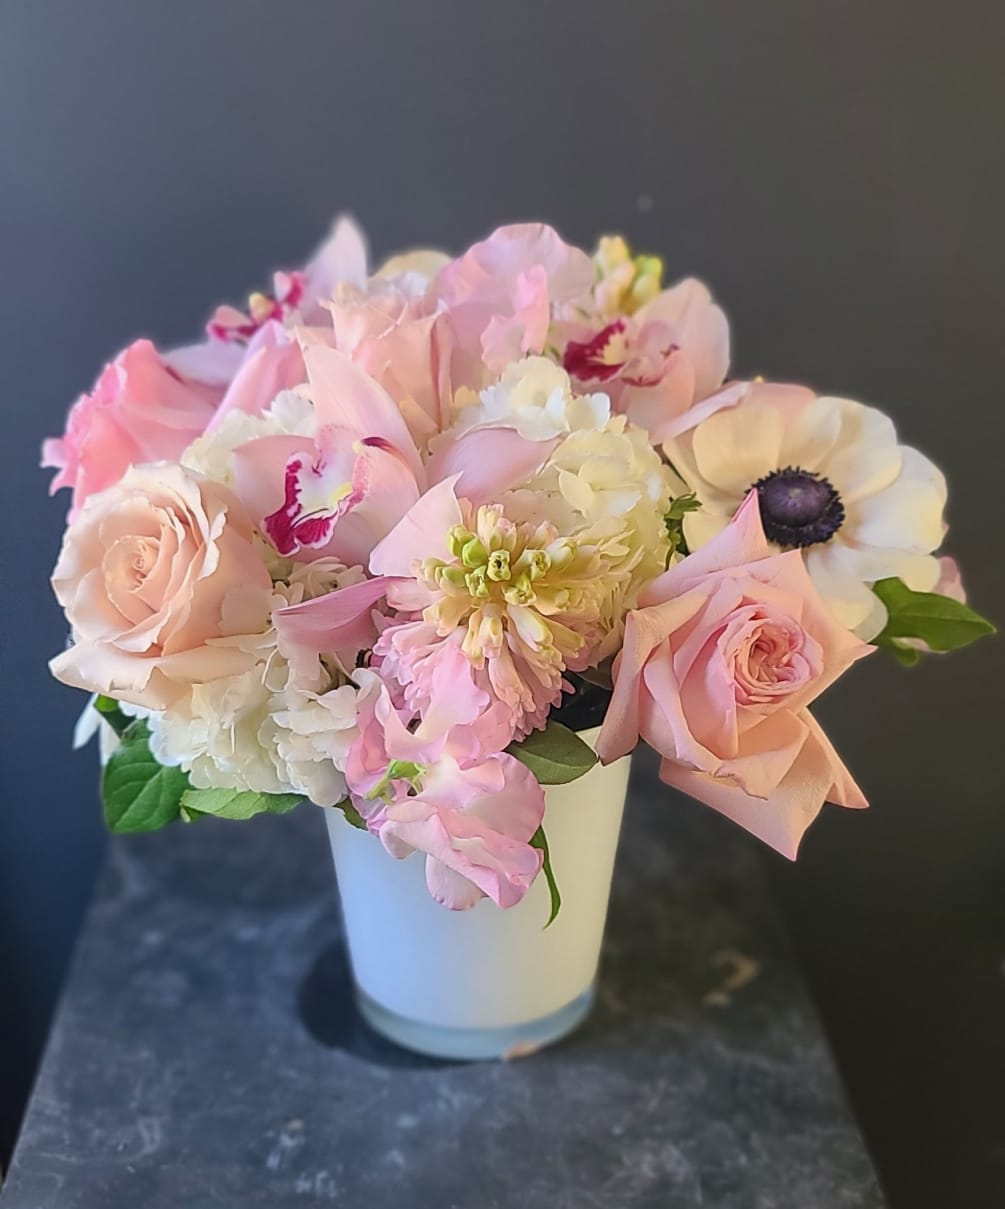 A sweet bouquet of soft pink and white blooms in a modern